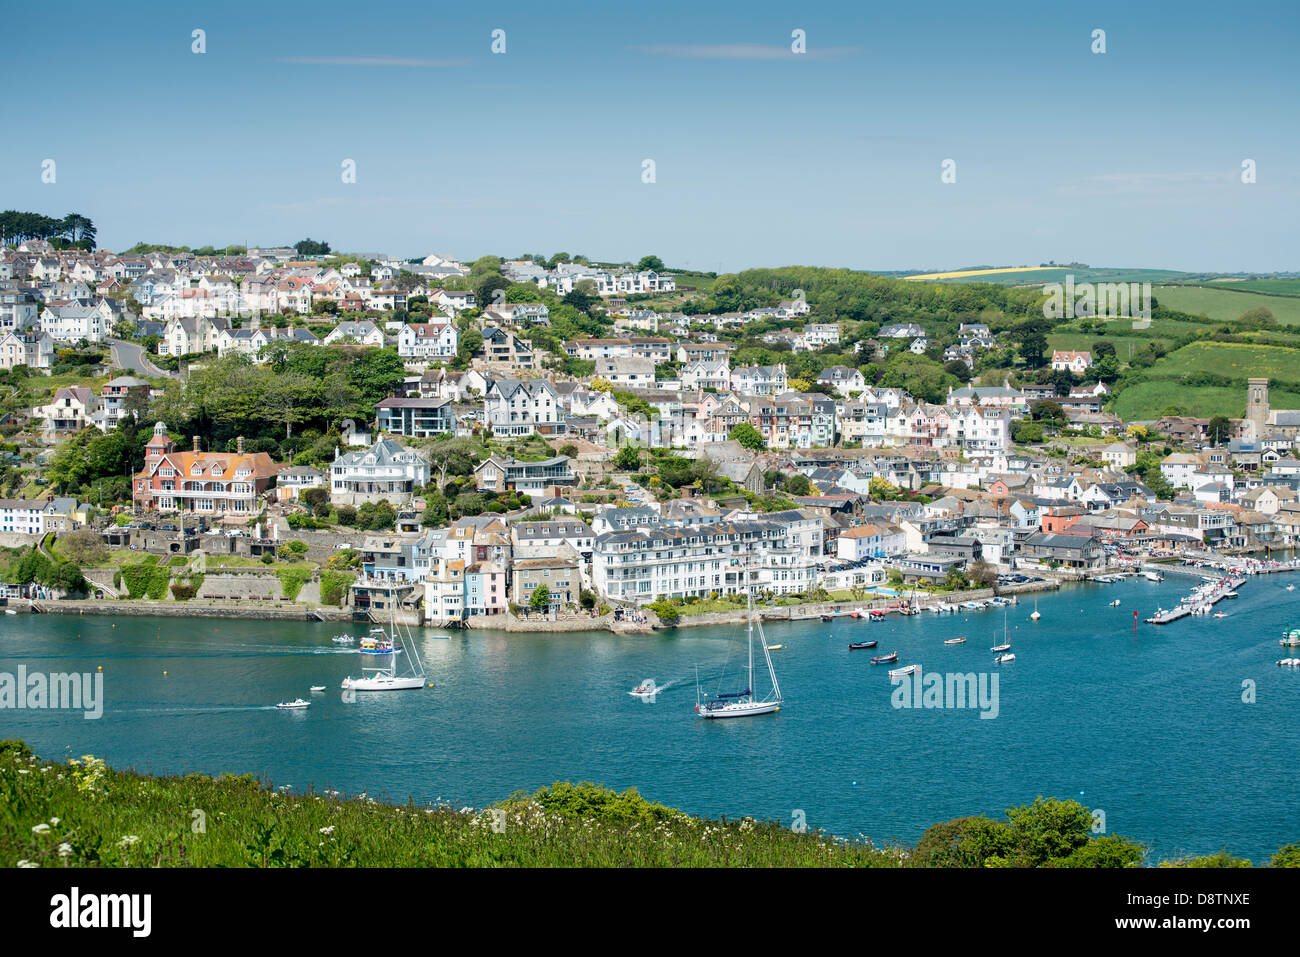 The resort town of Salcombe on the Kingsbridge Estuary in the South Hams Area of Outstanding Natural Beauty in Devon England Stock Photo